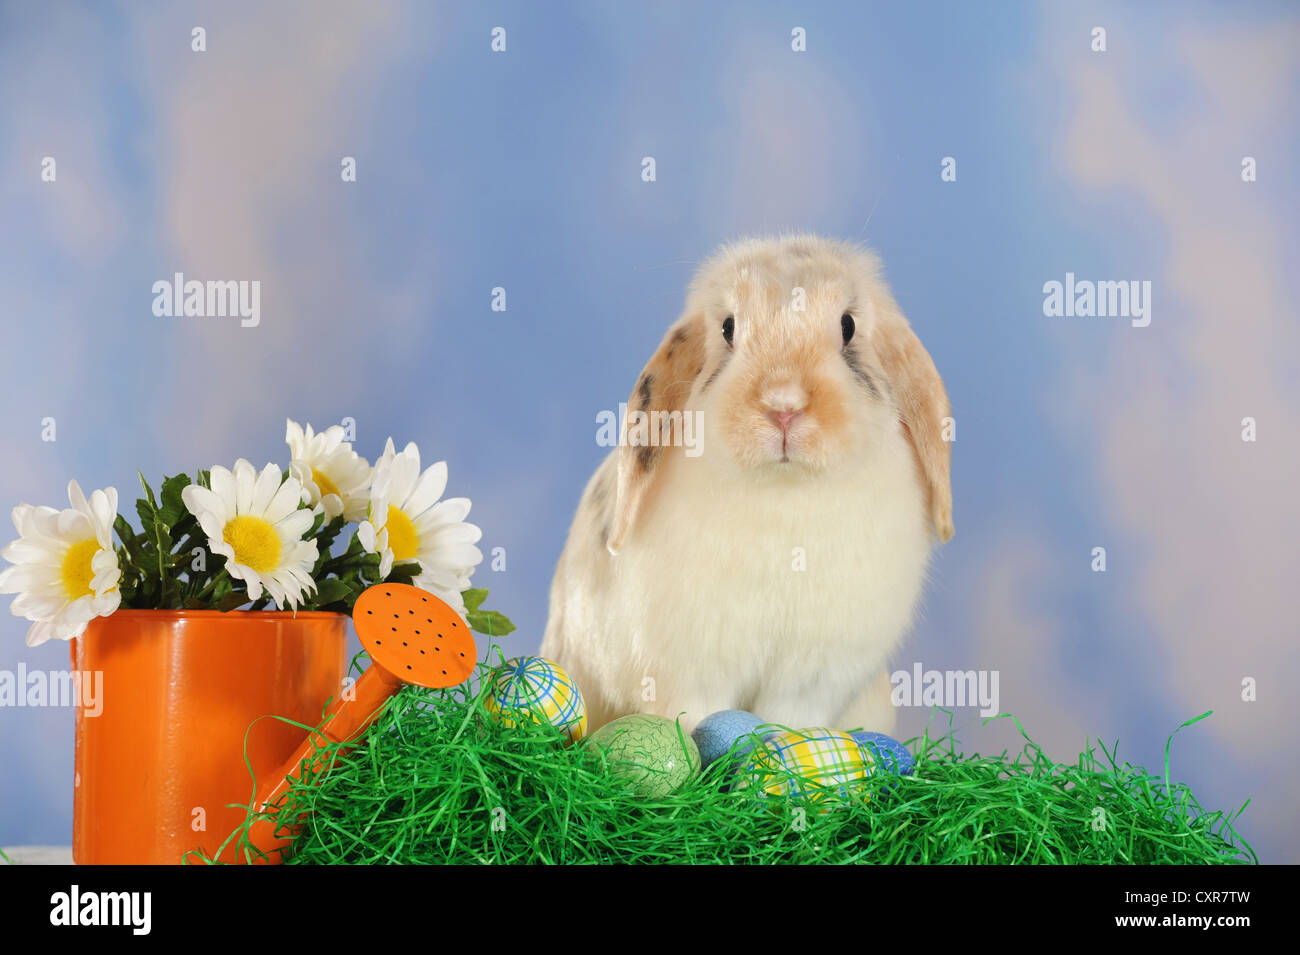 Spotted long eared rabbit sitting next to Easter eggs Stock Photo